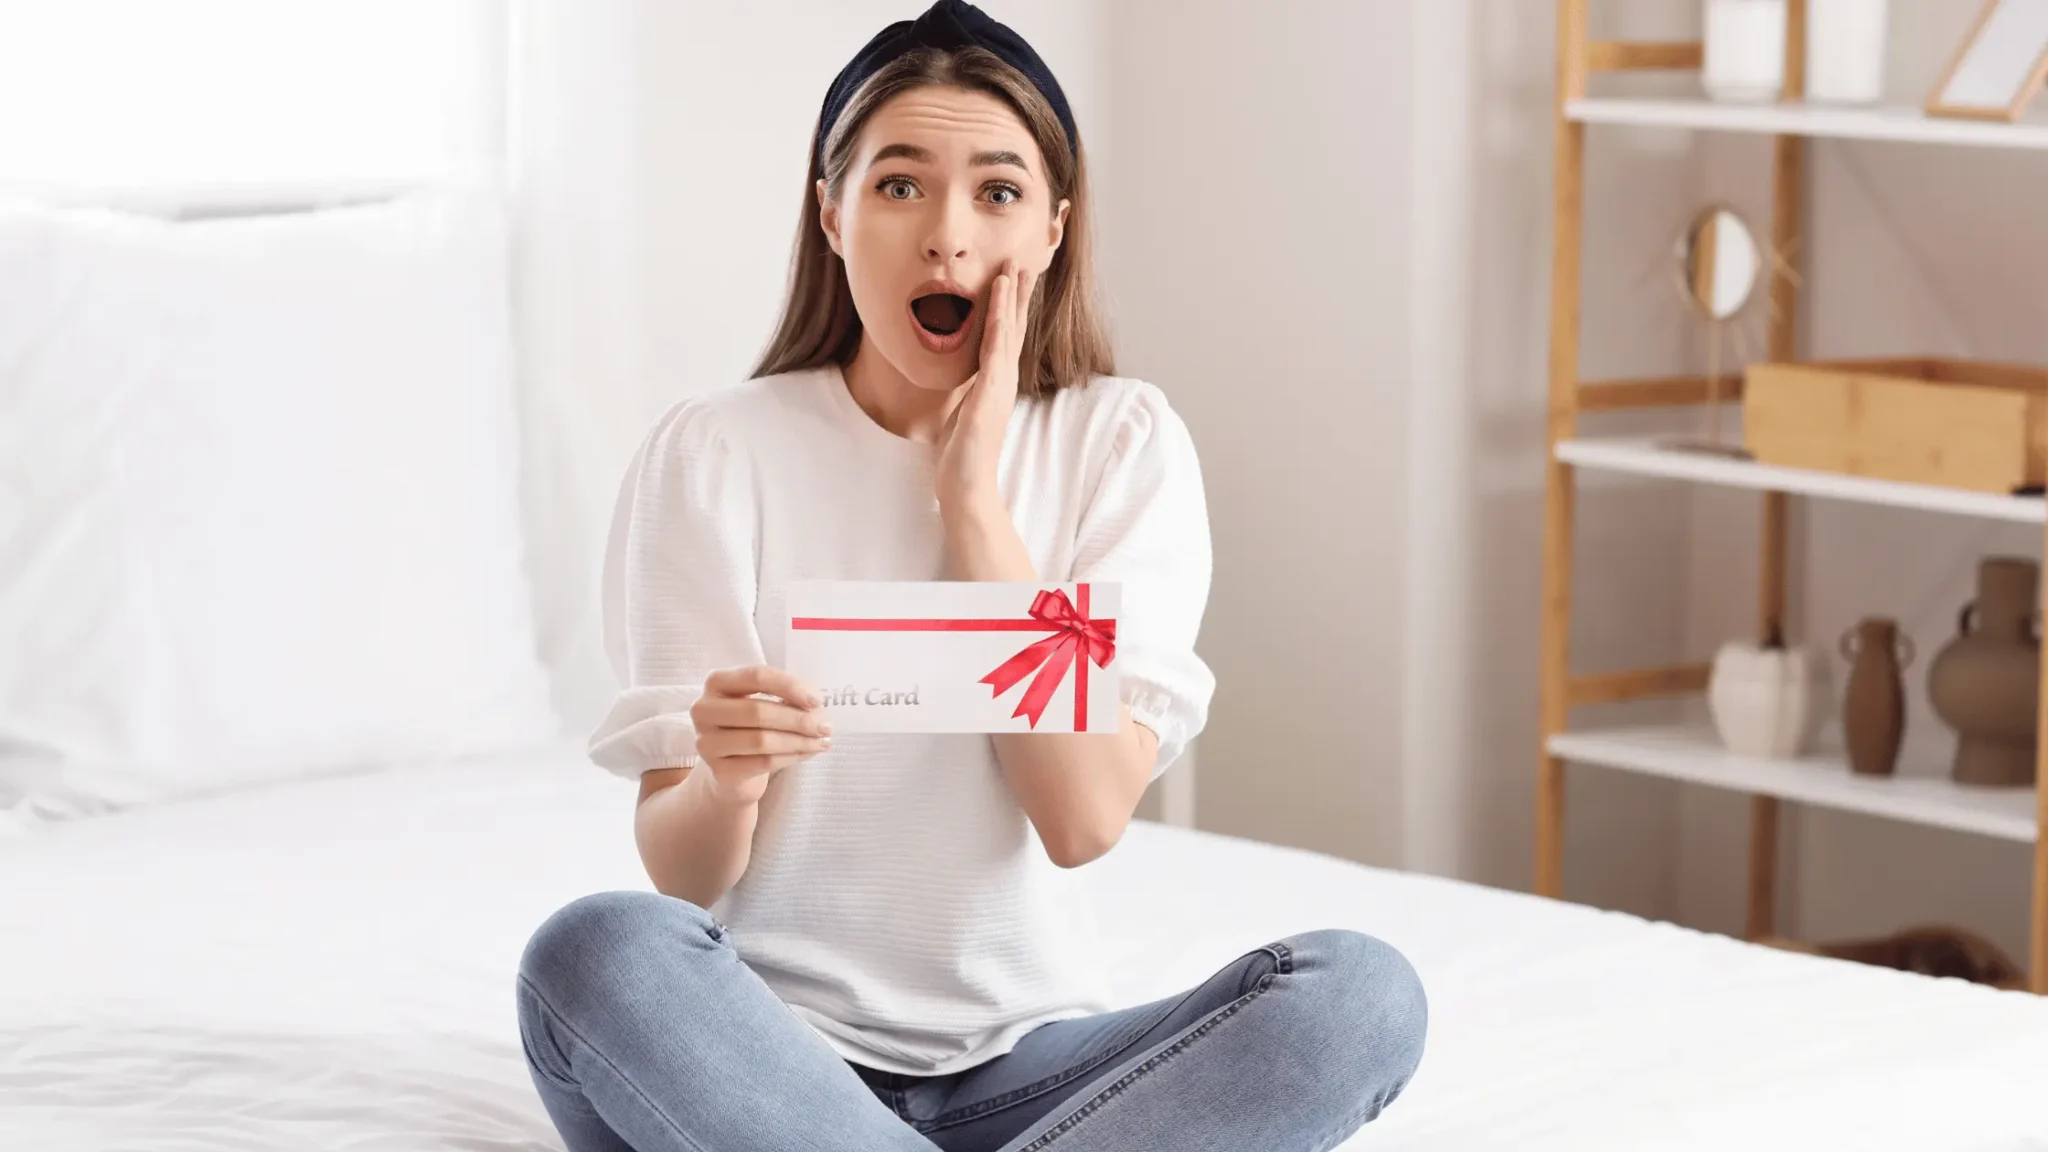 surprised lady holding a gift card